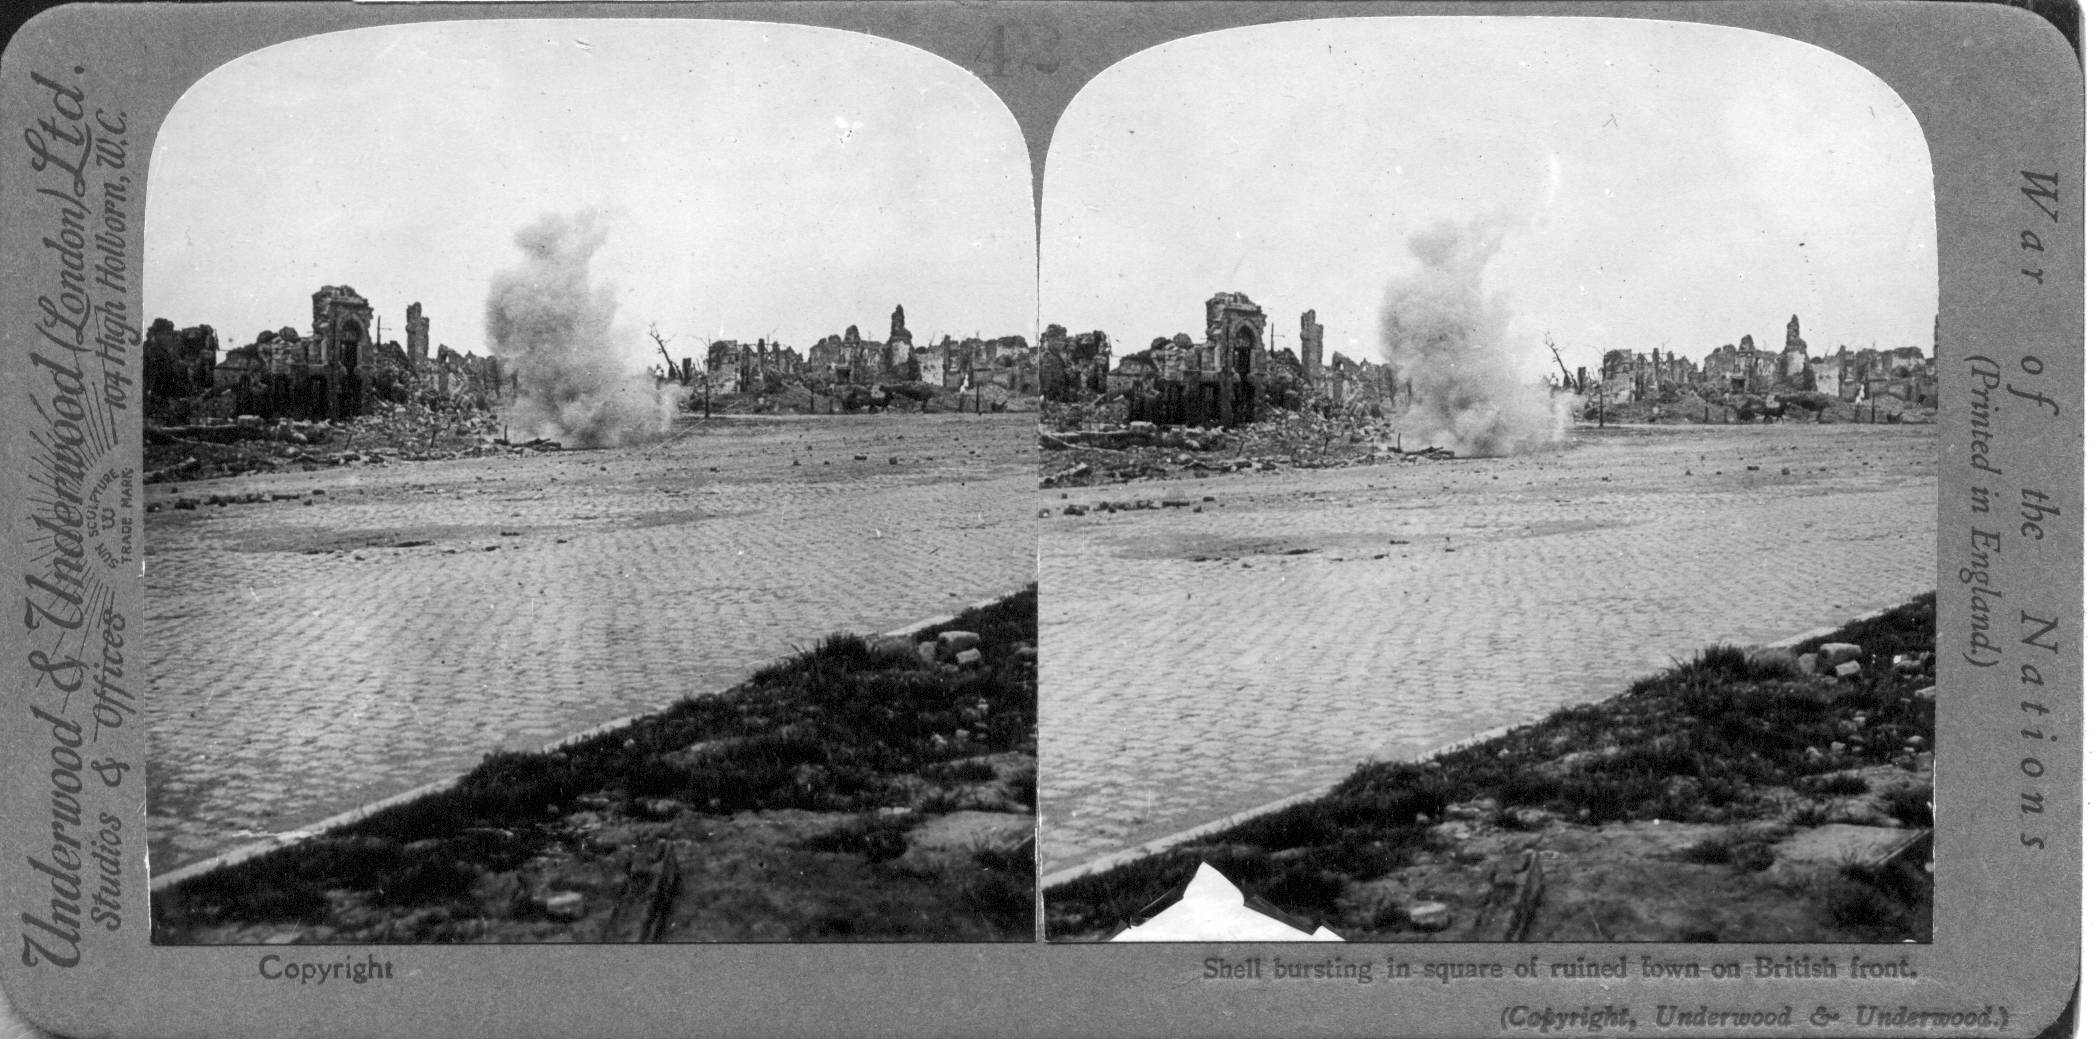 Shell bursting in square of ruined town on British front